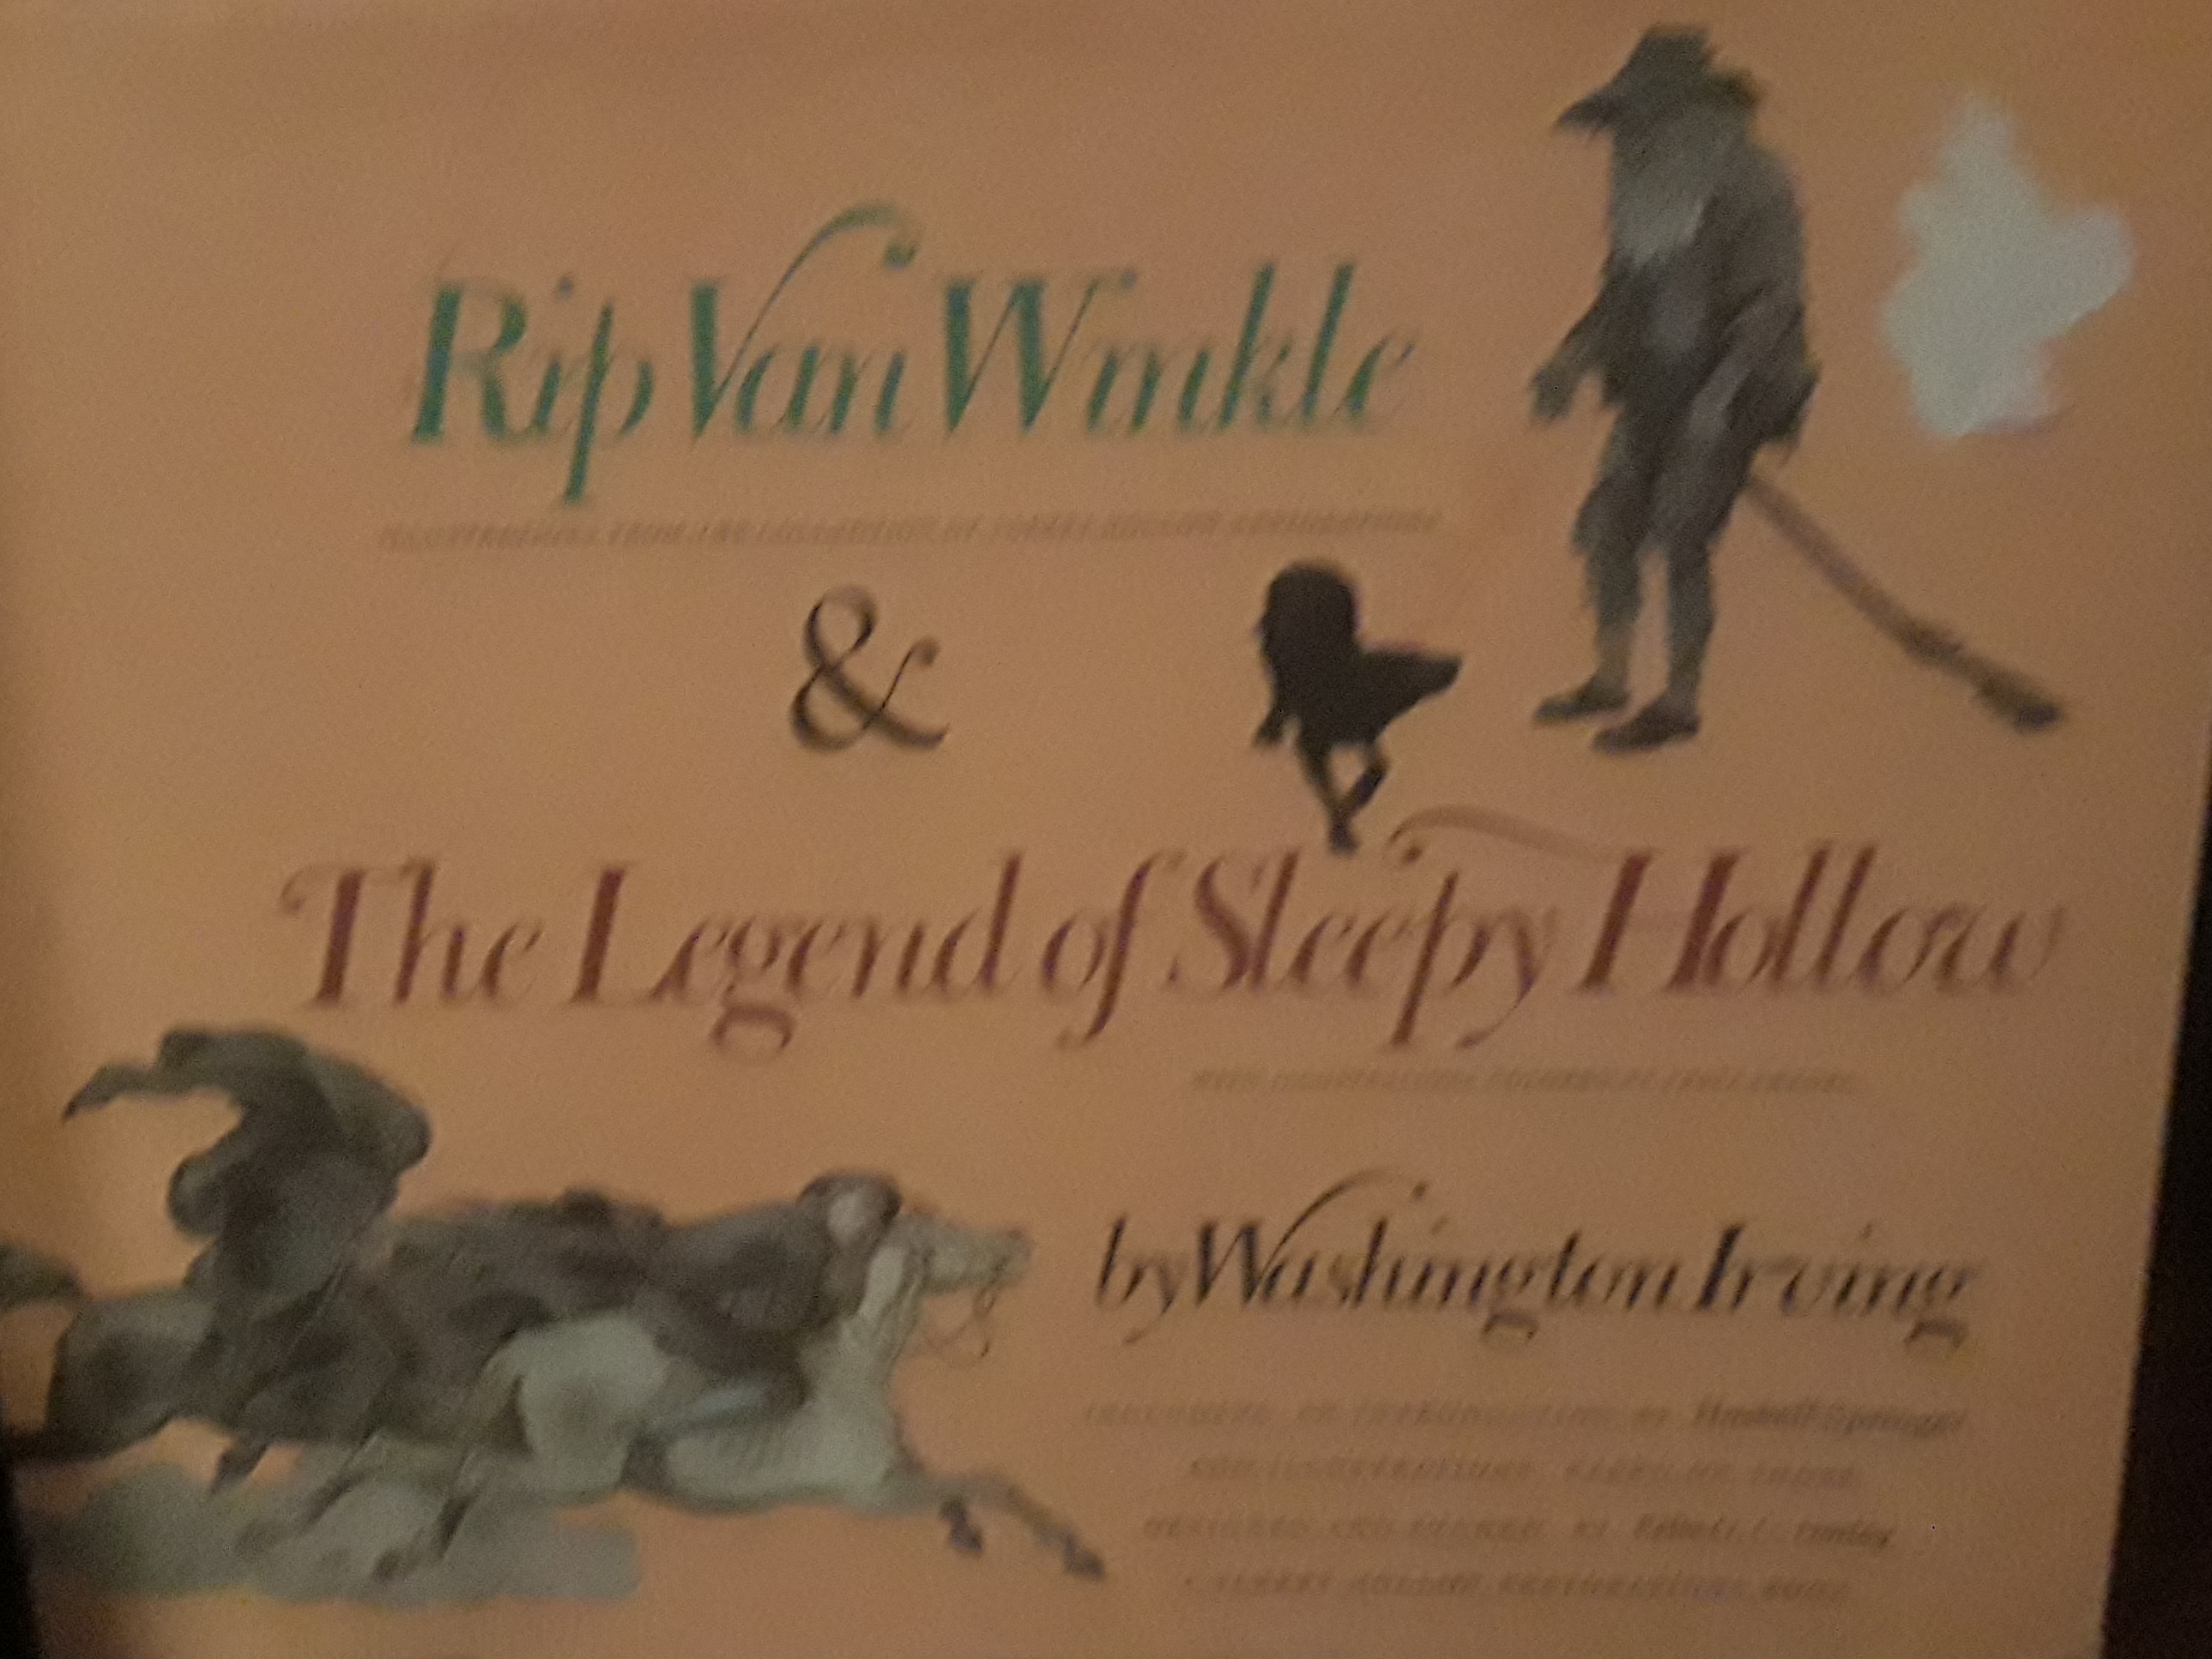 Rip Van Winkle & The Legend of Sleepy Hollow - Irving, Washington (Intro. by Haskell Springer)